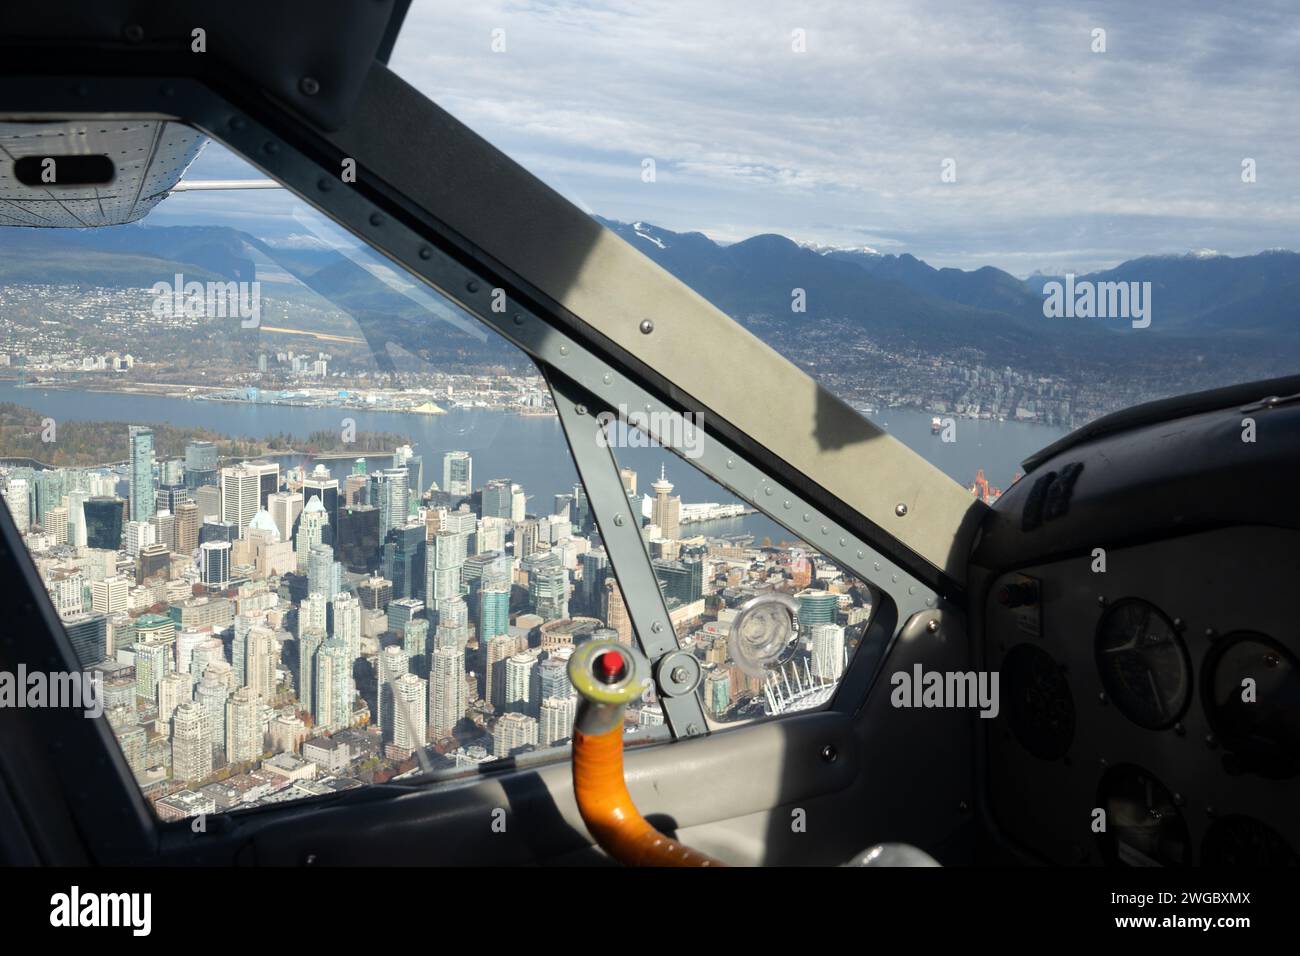 Urban cityscape view from a helicopter, Vancouver, British Columbia, Canada Stock Photo